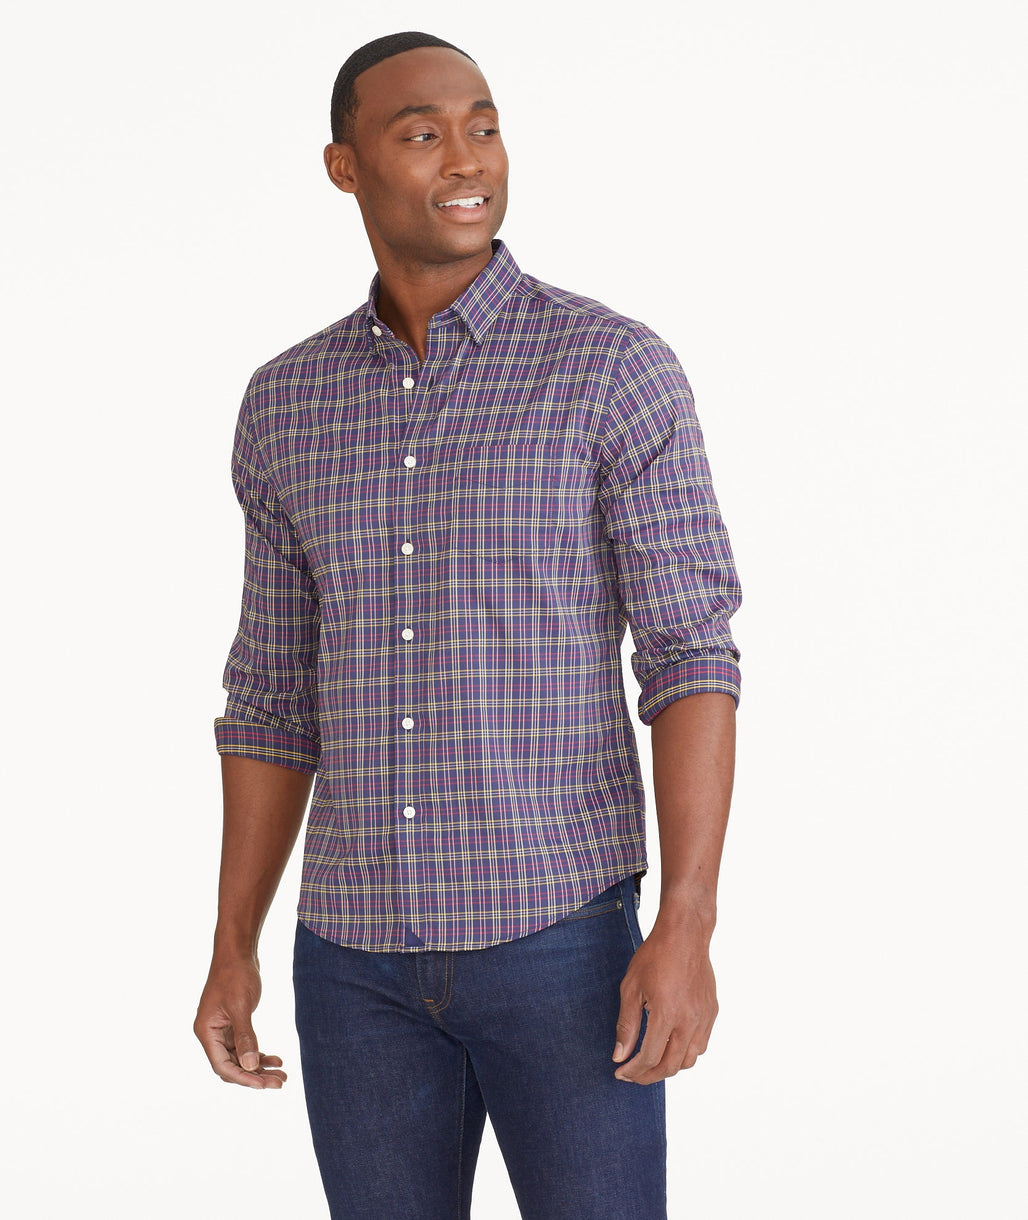 Wrinkle-Free Performance Talty Shirt